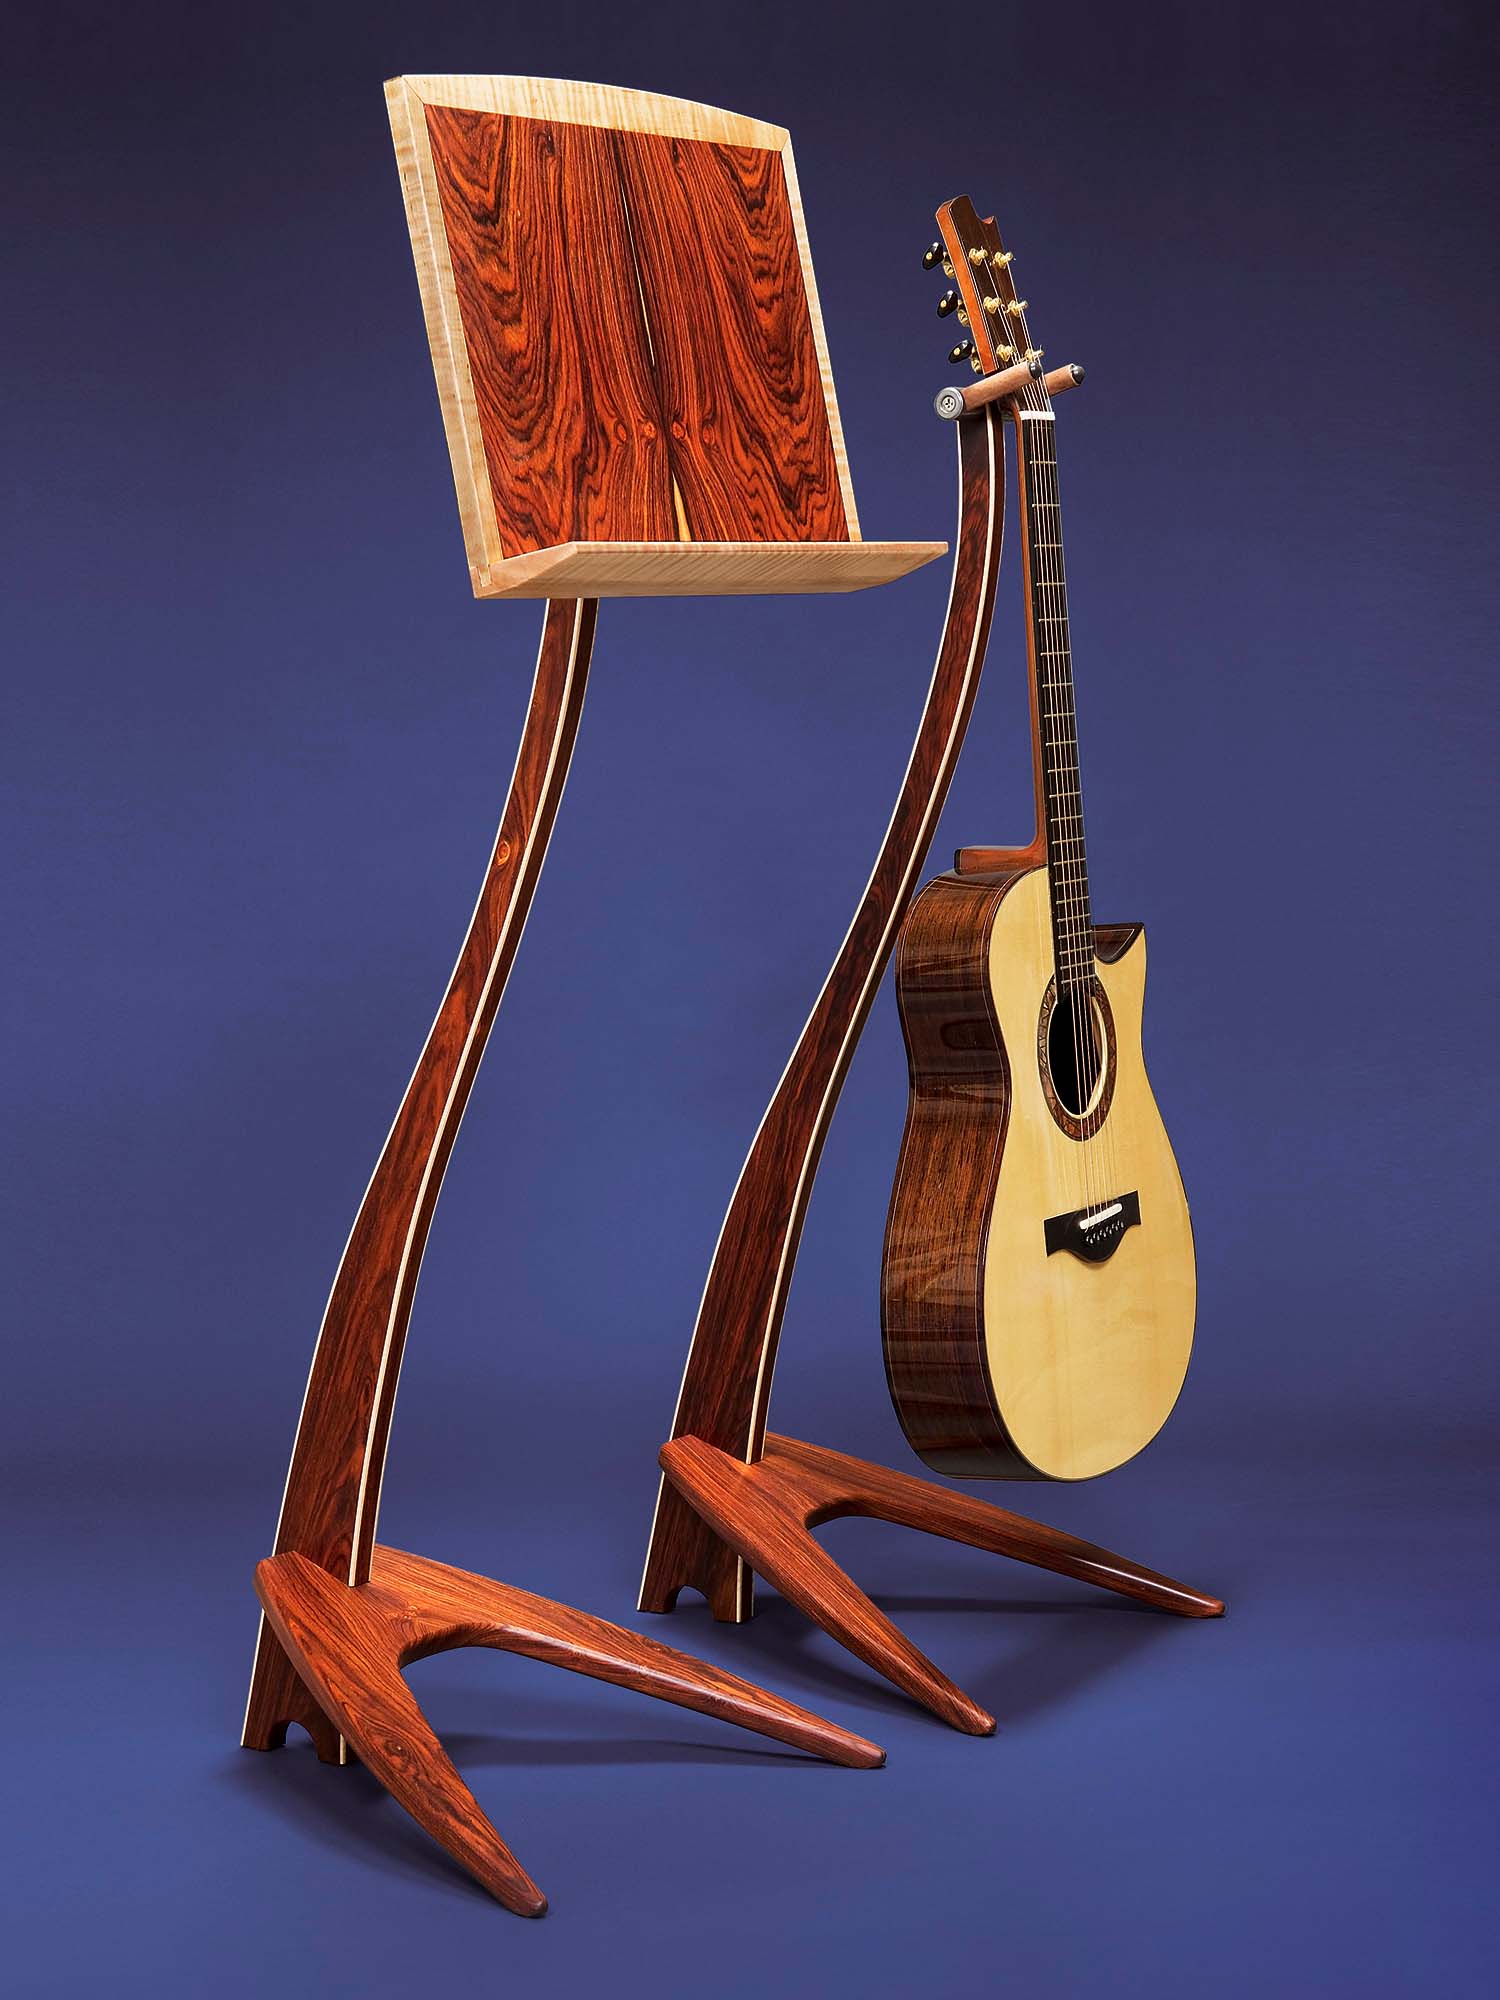 WM Cocobolo Music and Guitar Stands